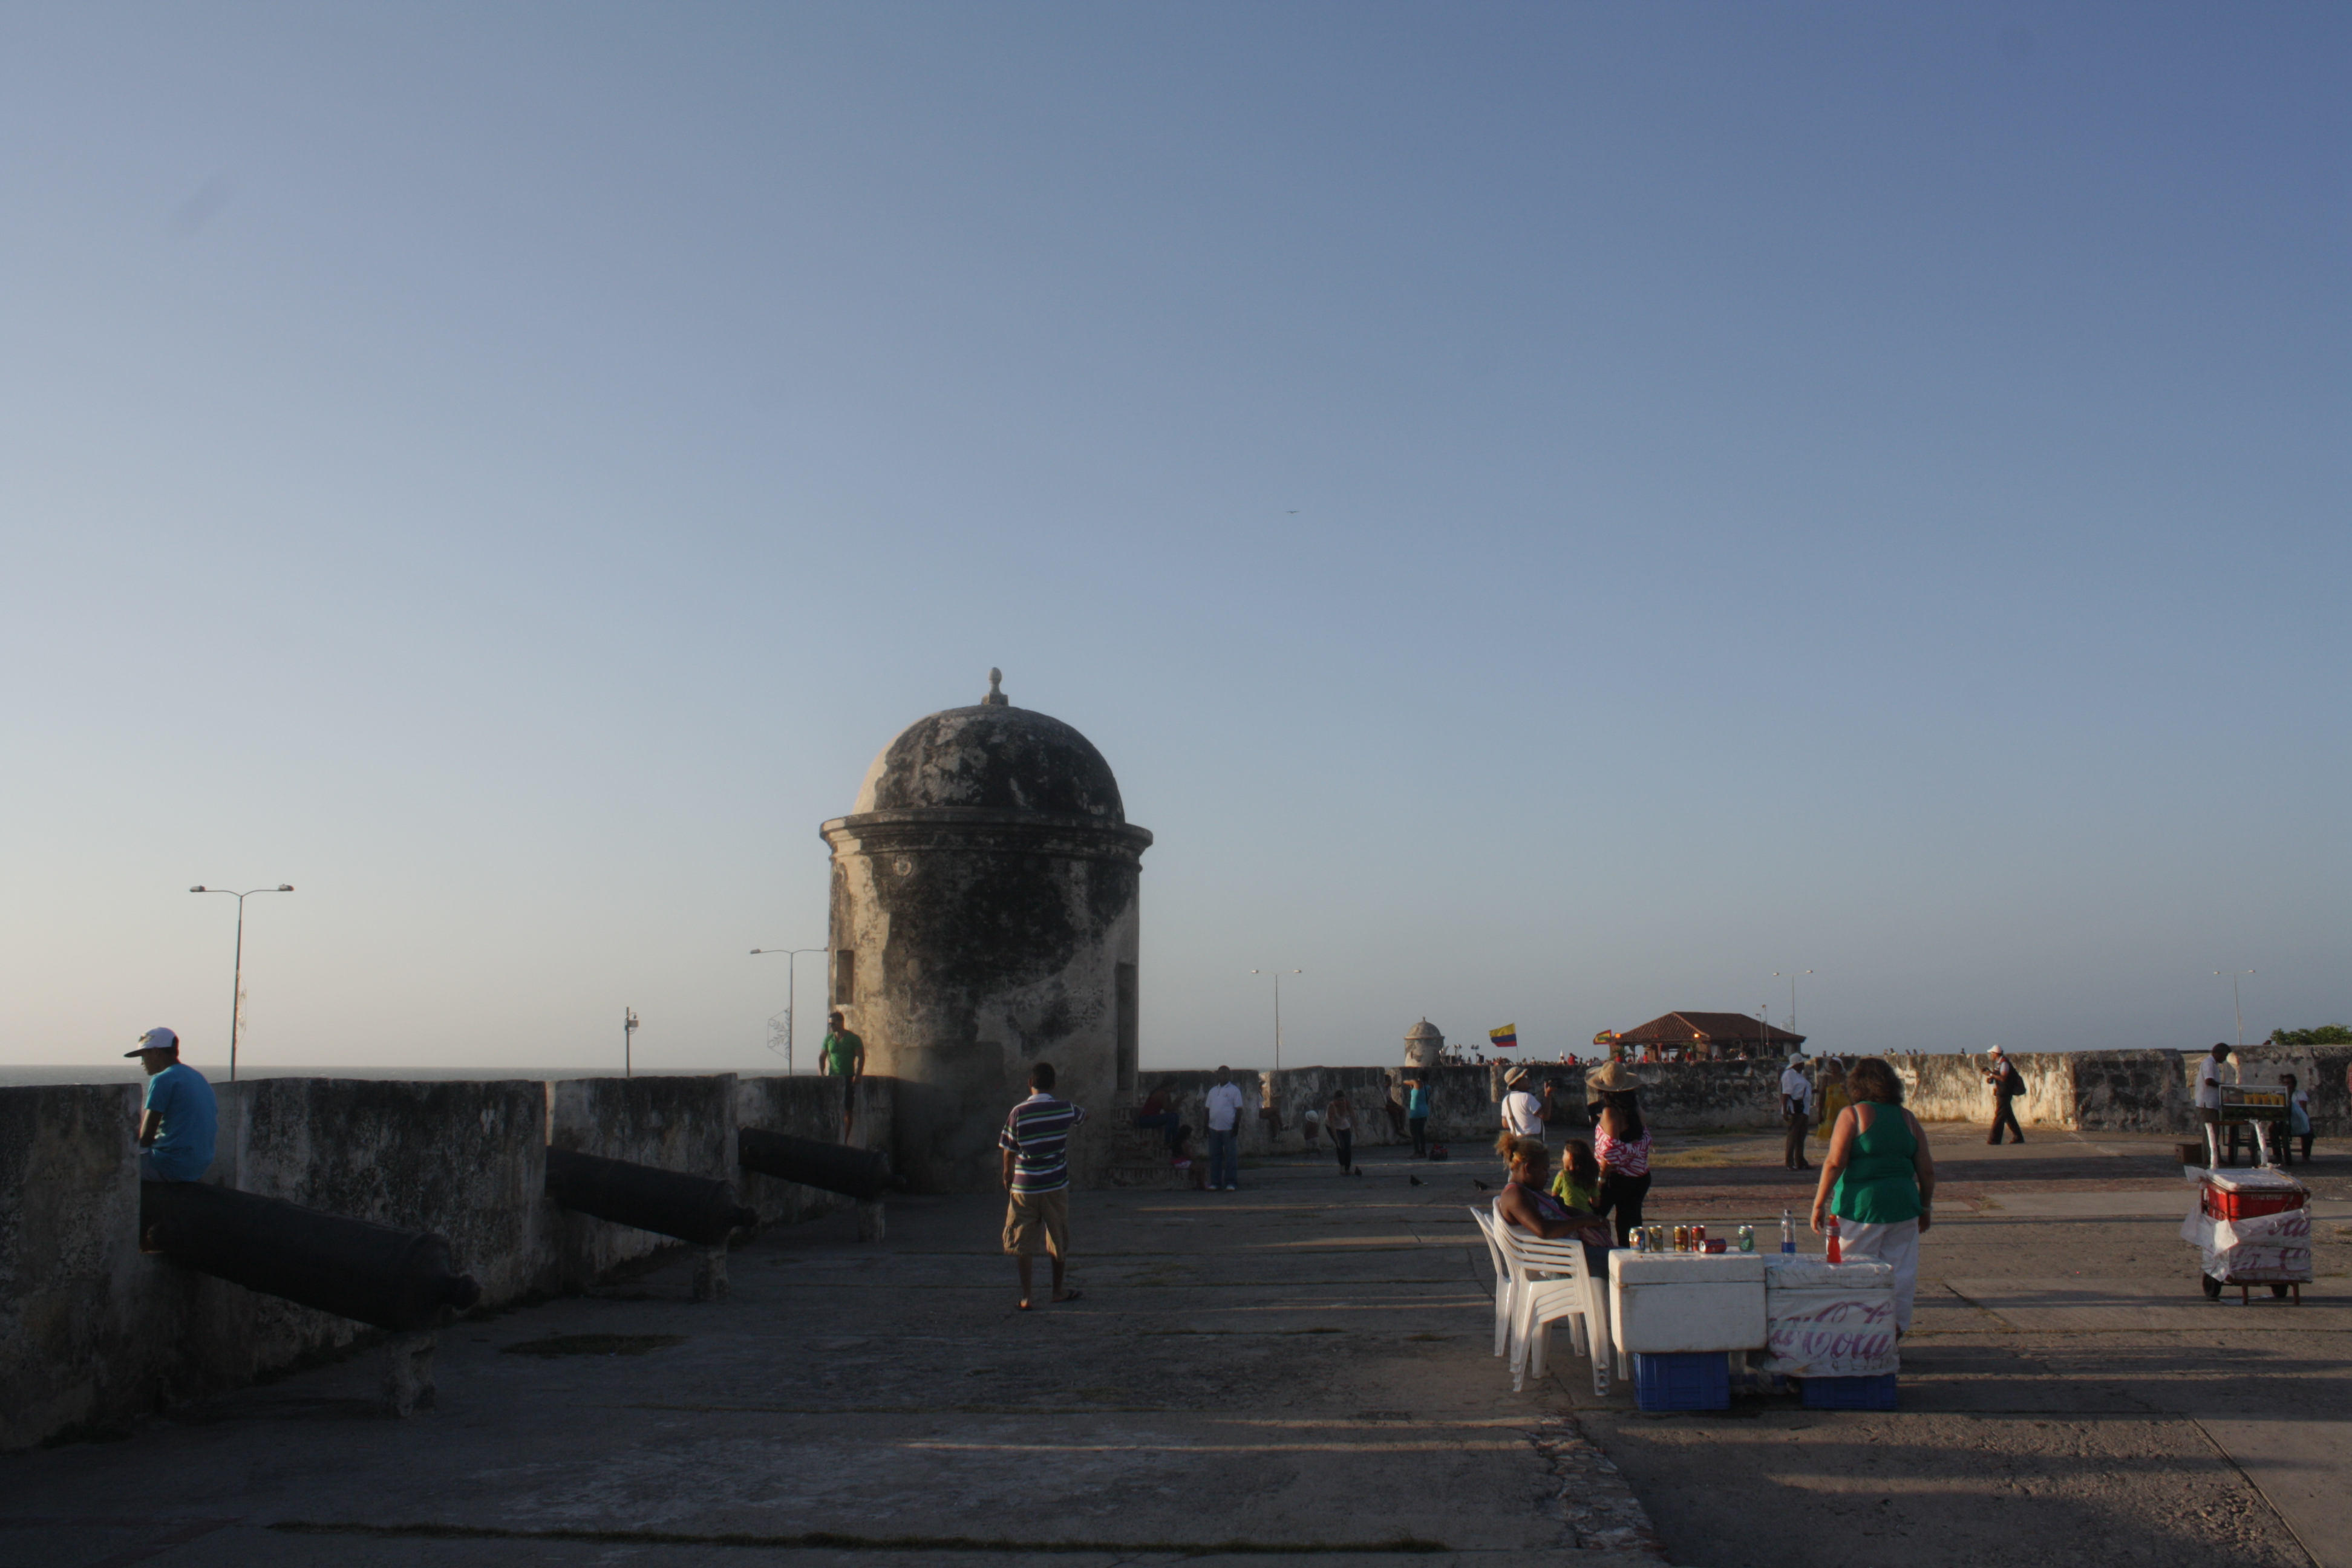 Old walls that used to protect Cartagena from pirates and attacks 